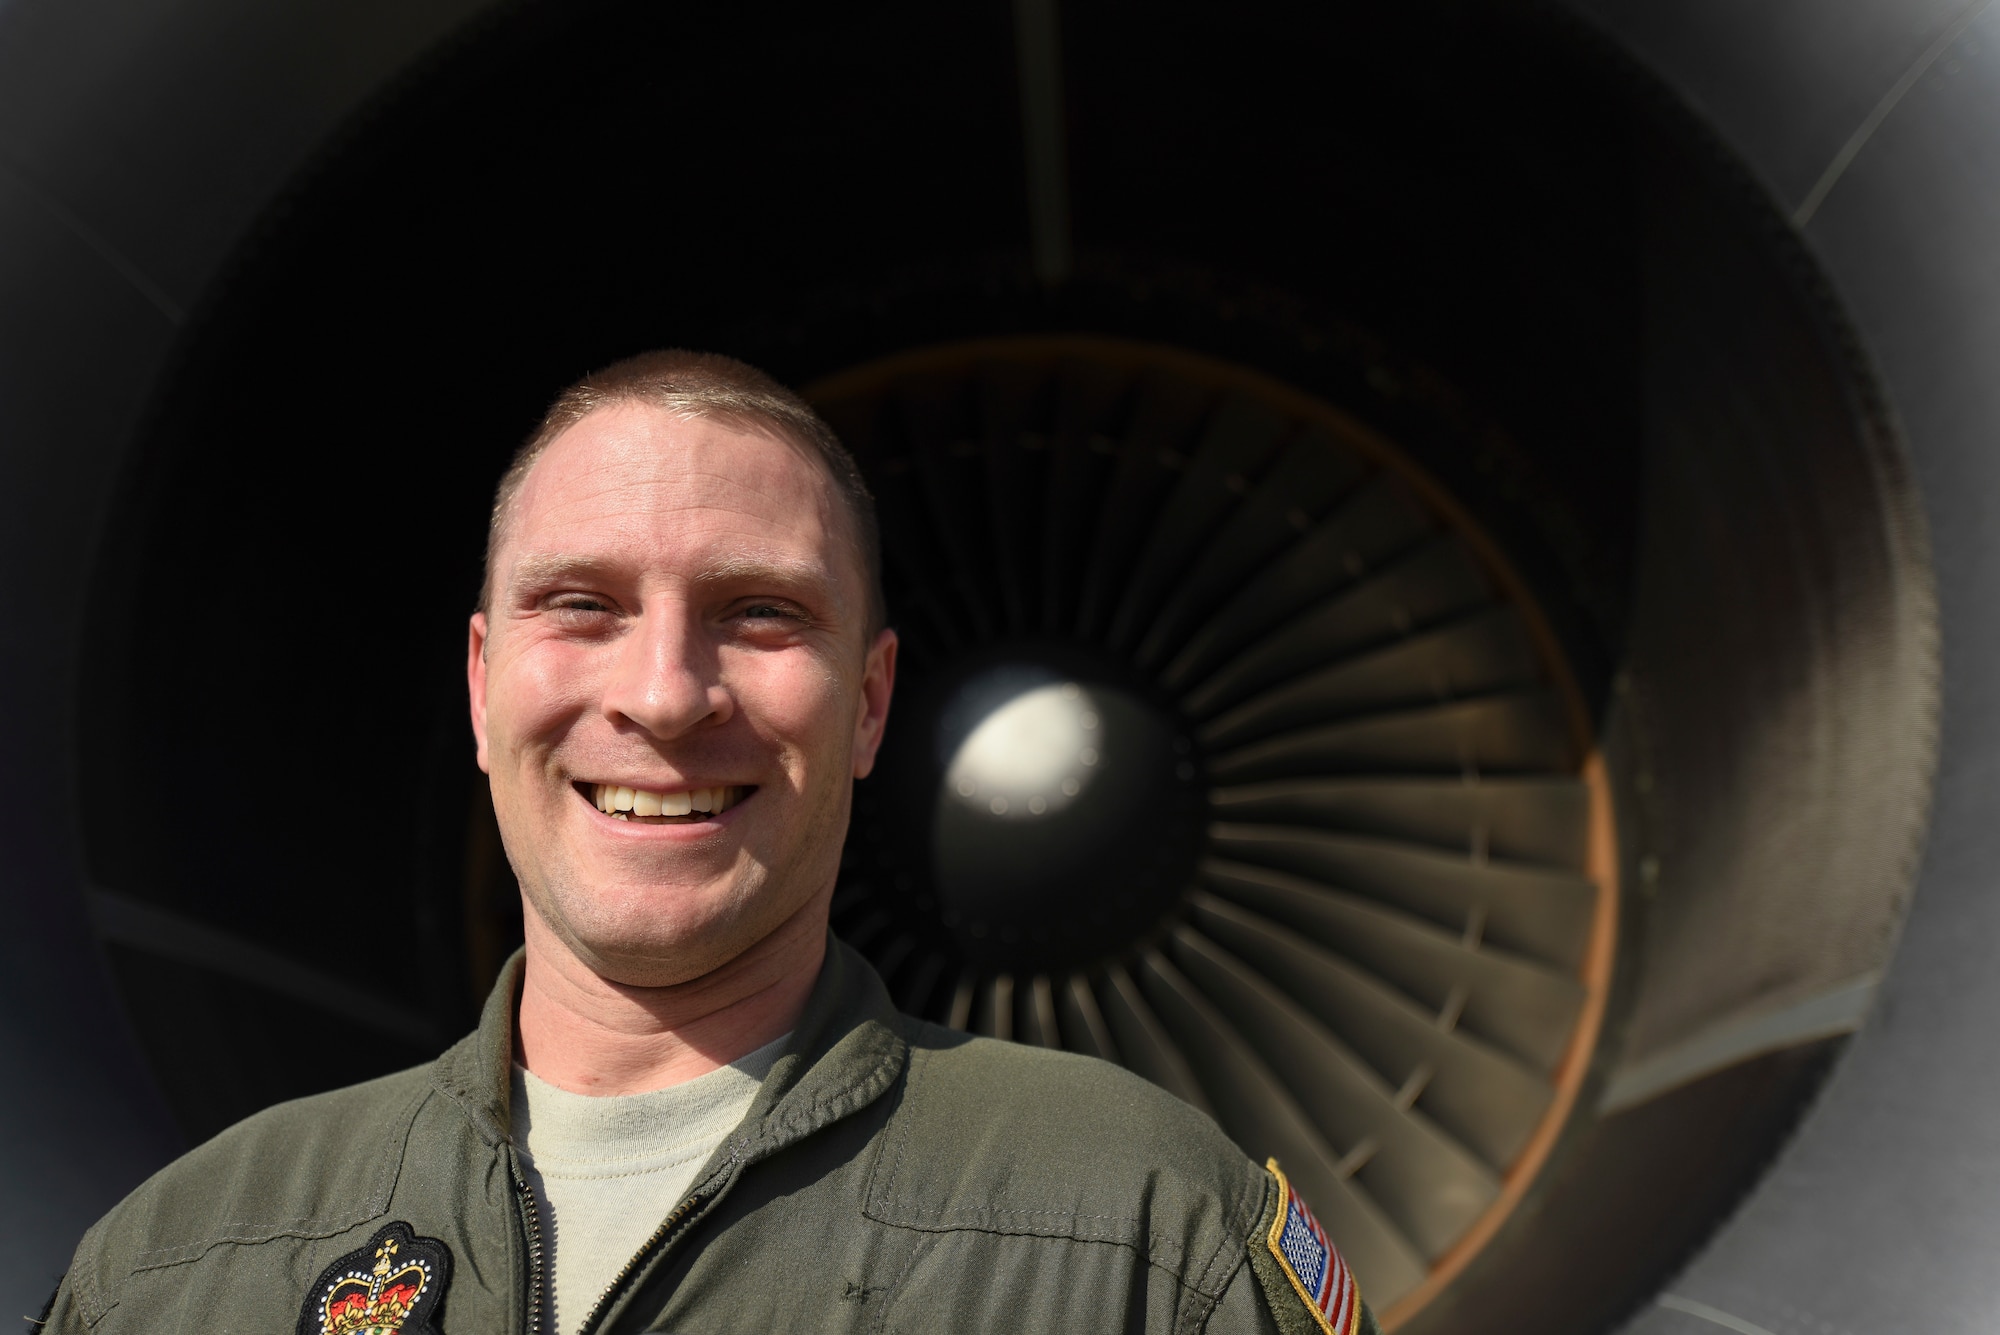 U.S. Air Force Master Sgt. Jonathan Haas, Royal Australian Air Force 33rd Squadron KC-30A Multi-Role Tanker Transport air-refueling operator, smiles in front of a KC-30A Multi-Role Tanker Transport turbine on RAAF Base Darwin, Australia, Aug. 8, 2018. Haas is assigned to RAAF Base Amberley, Australia, and has been an air-refueling instructor with the USAF Military Personnel Exchange Program for two years. (U.S. Air Force photo by Senior Airman Savannah L. Waters)